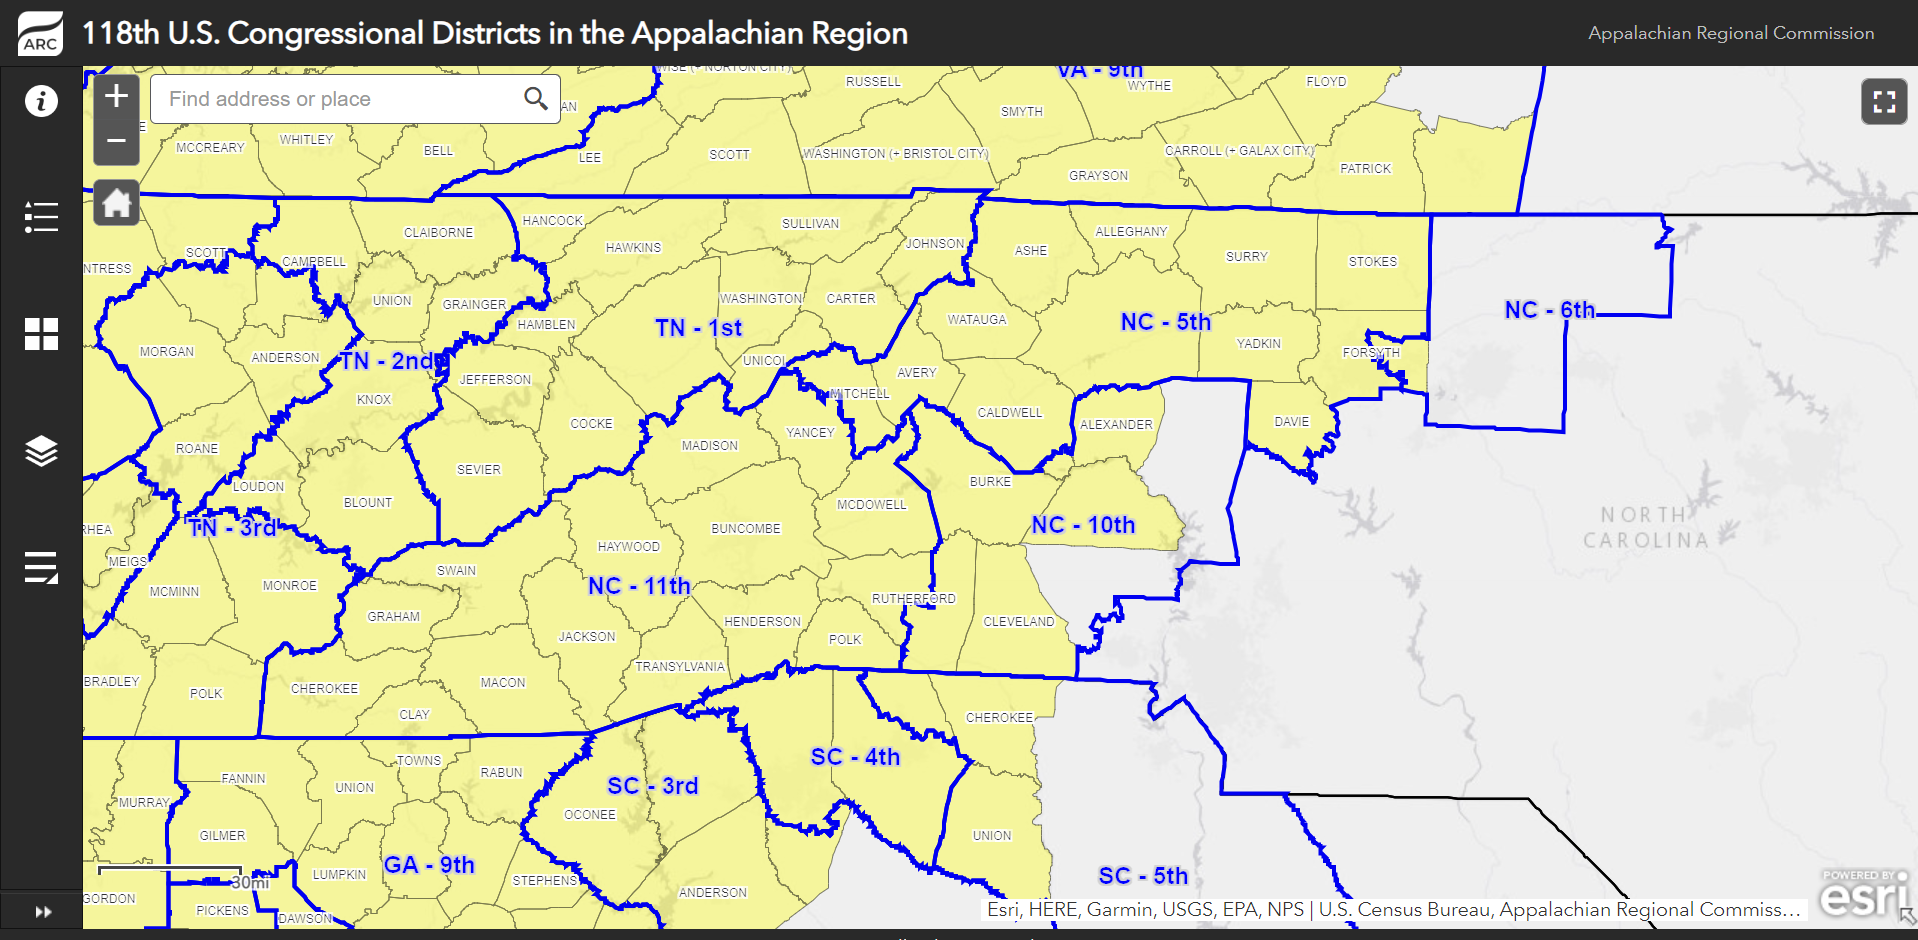 Map of 118th Congressional Districts in the Appalachian Region.